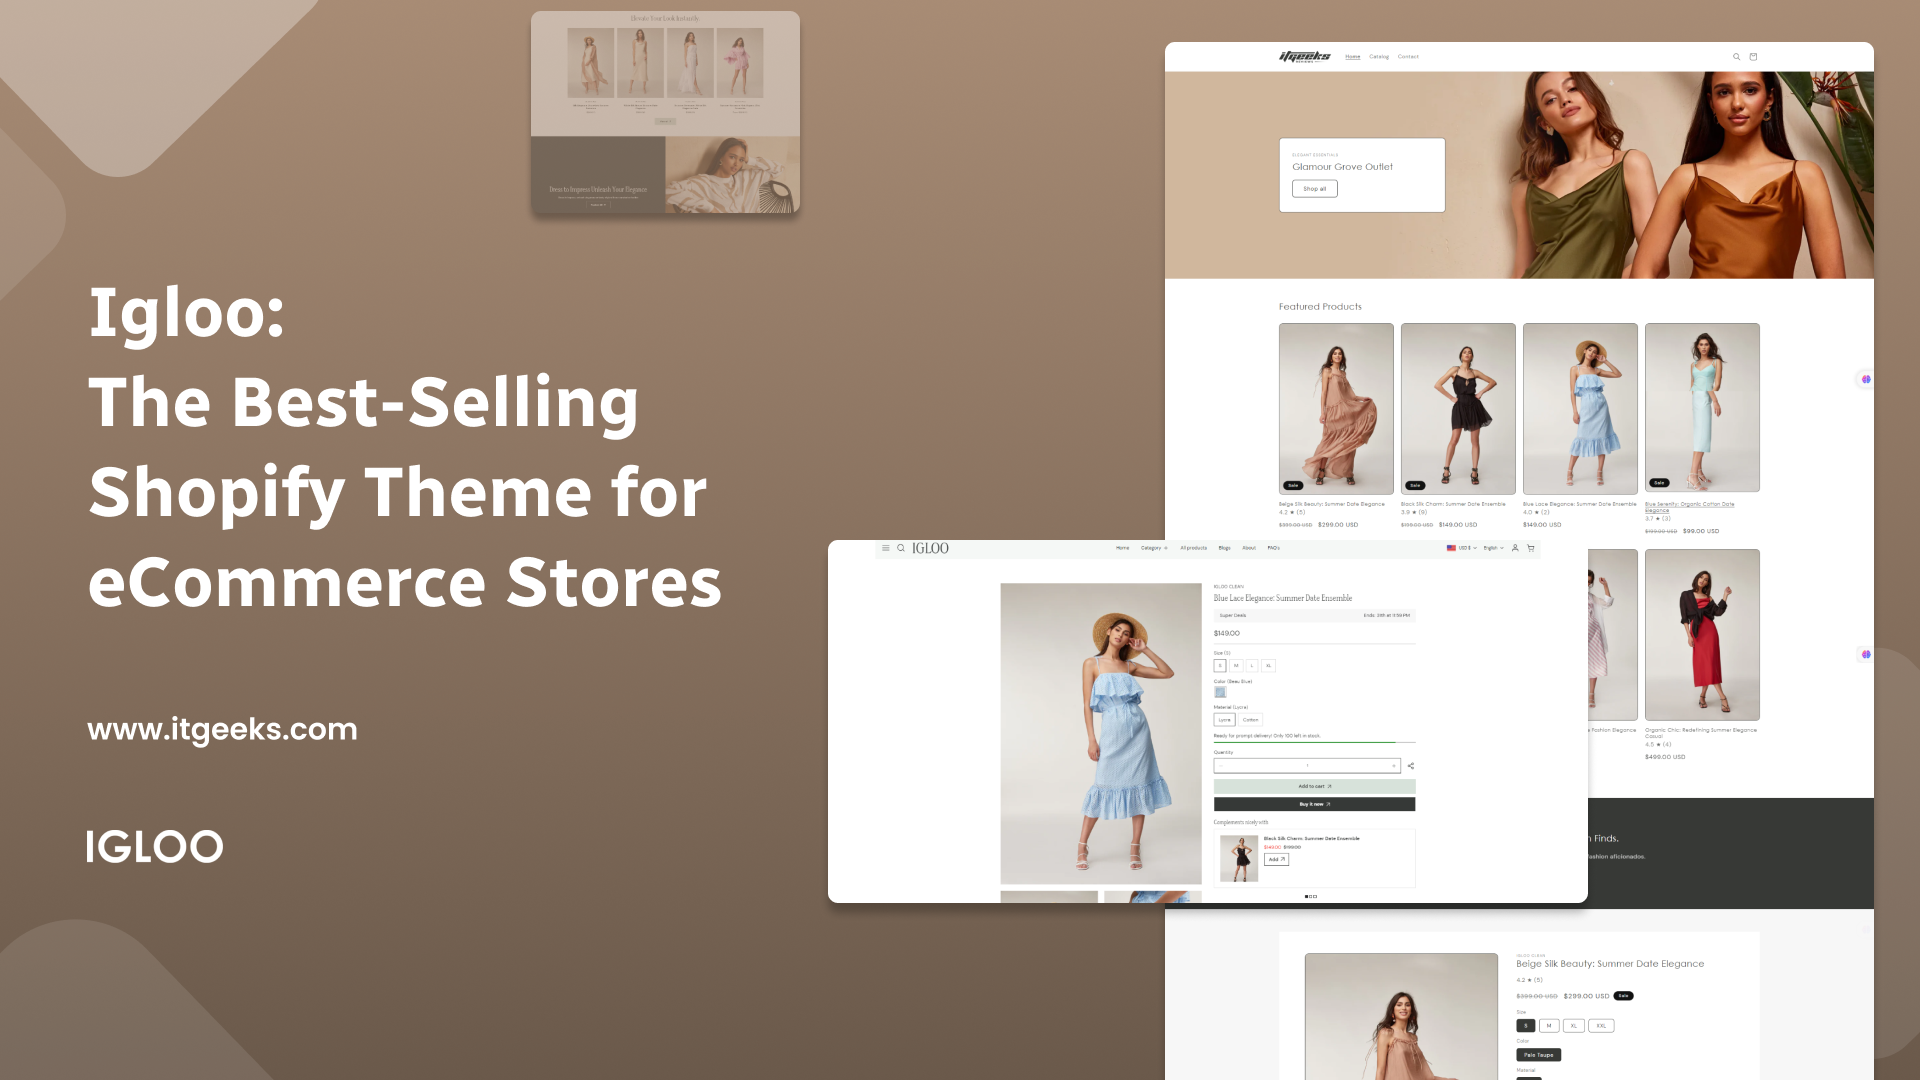 Igloo: The Best-Selling Shopify Theme for eCommerce Stores